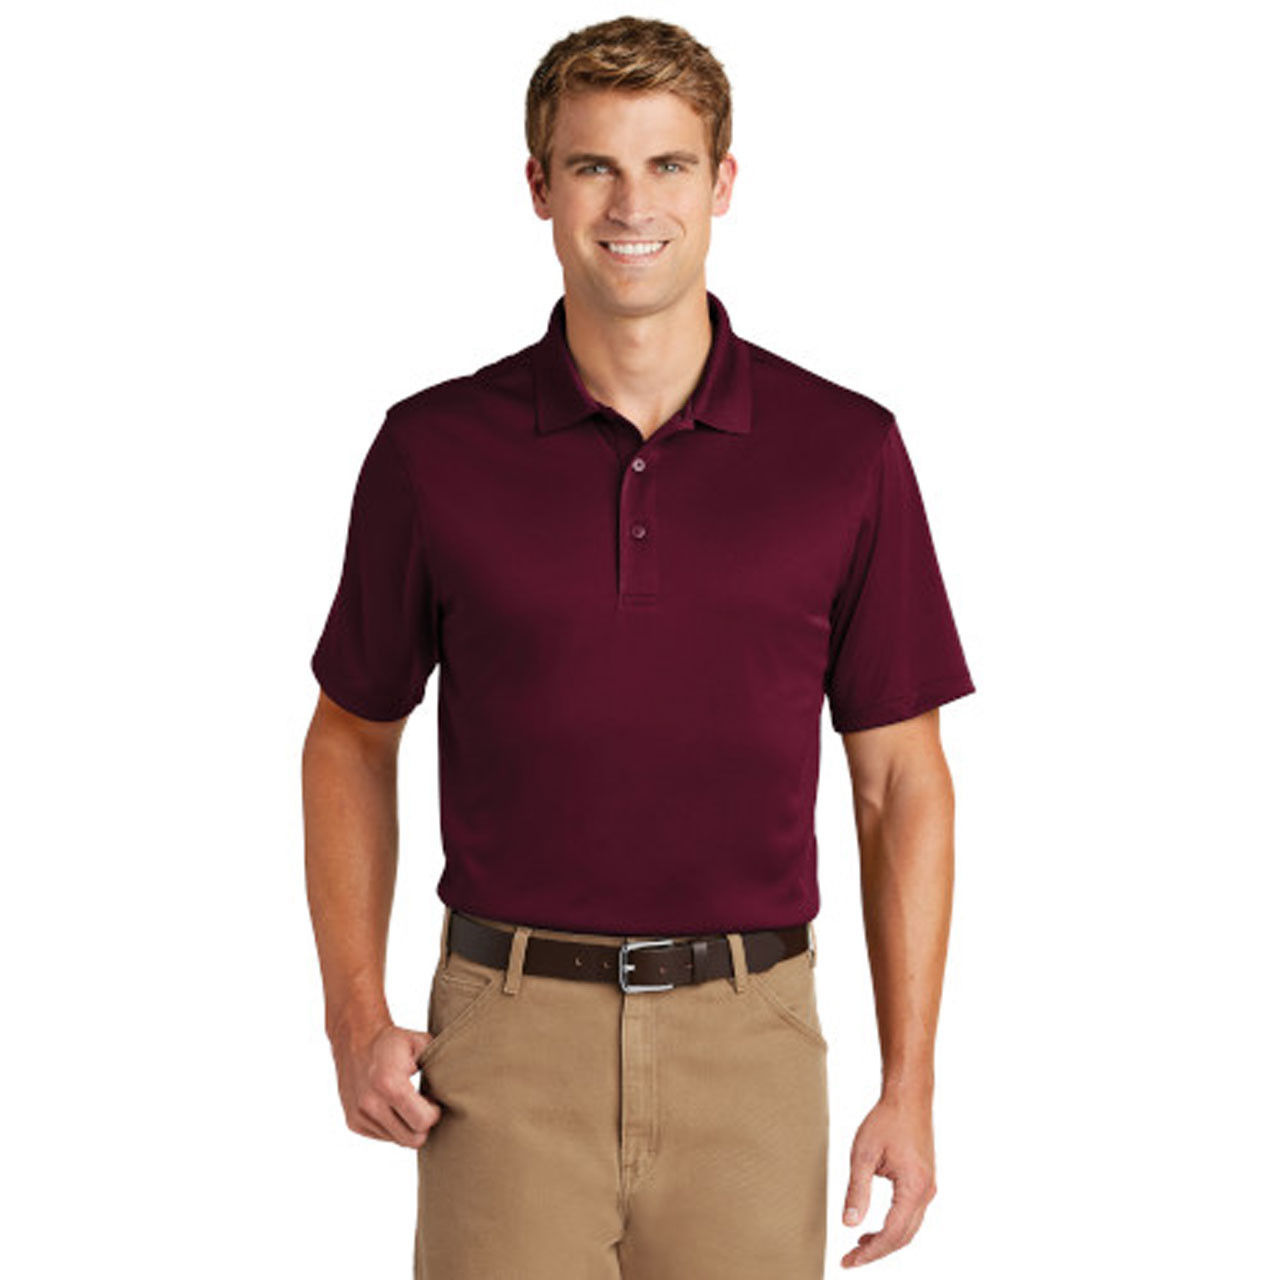 How many buttons does the placket of the men's maroon polo shirt have?